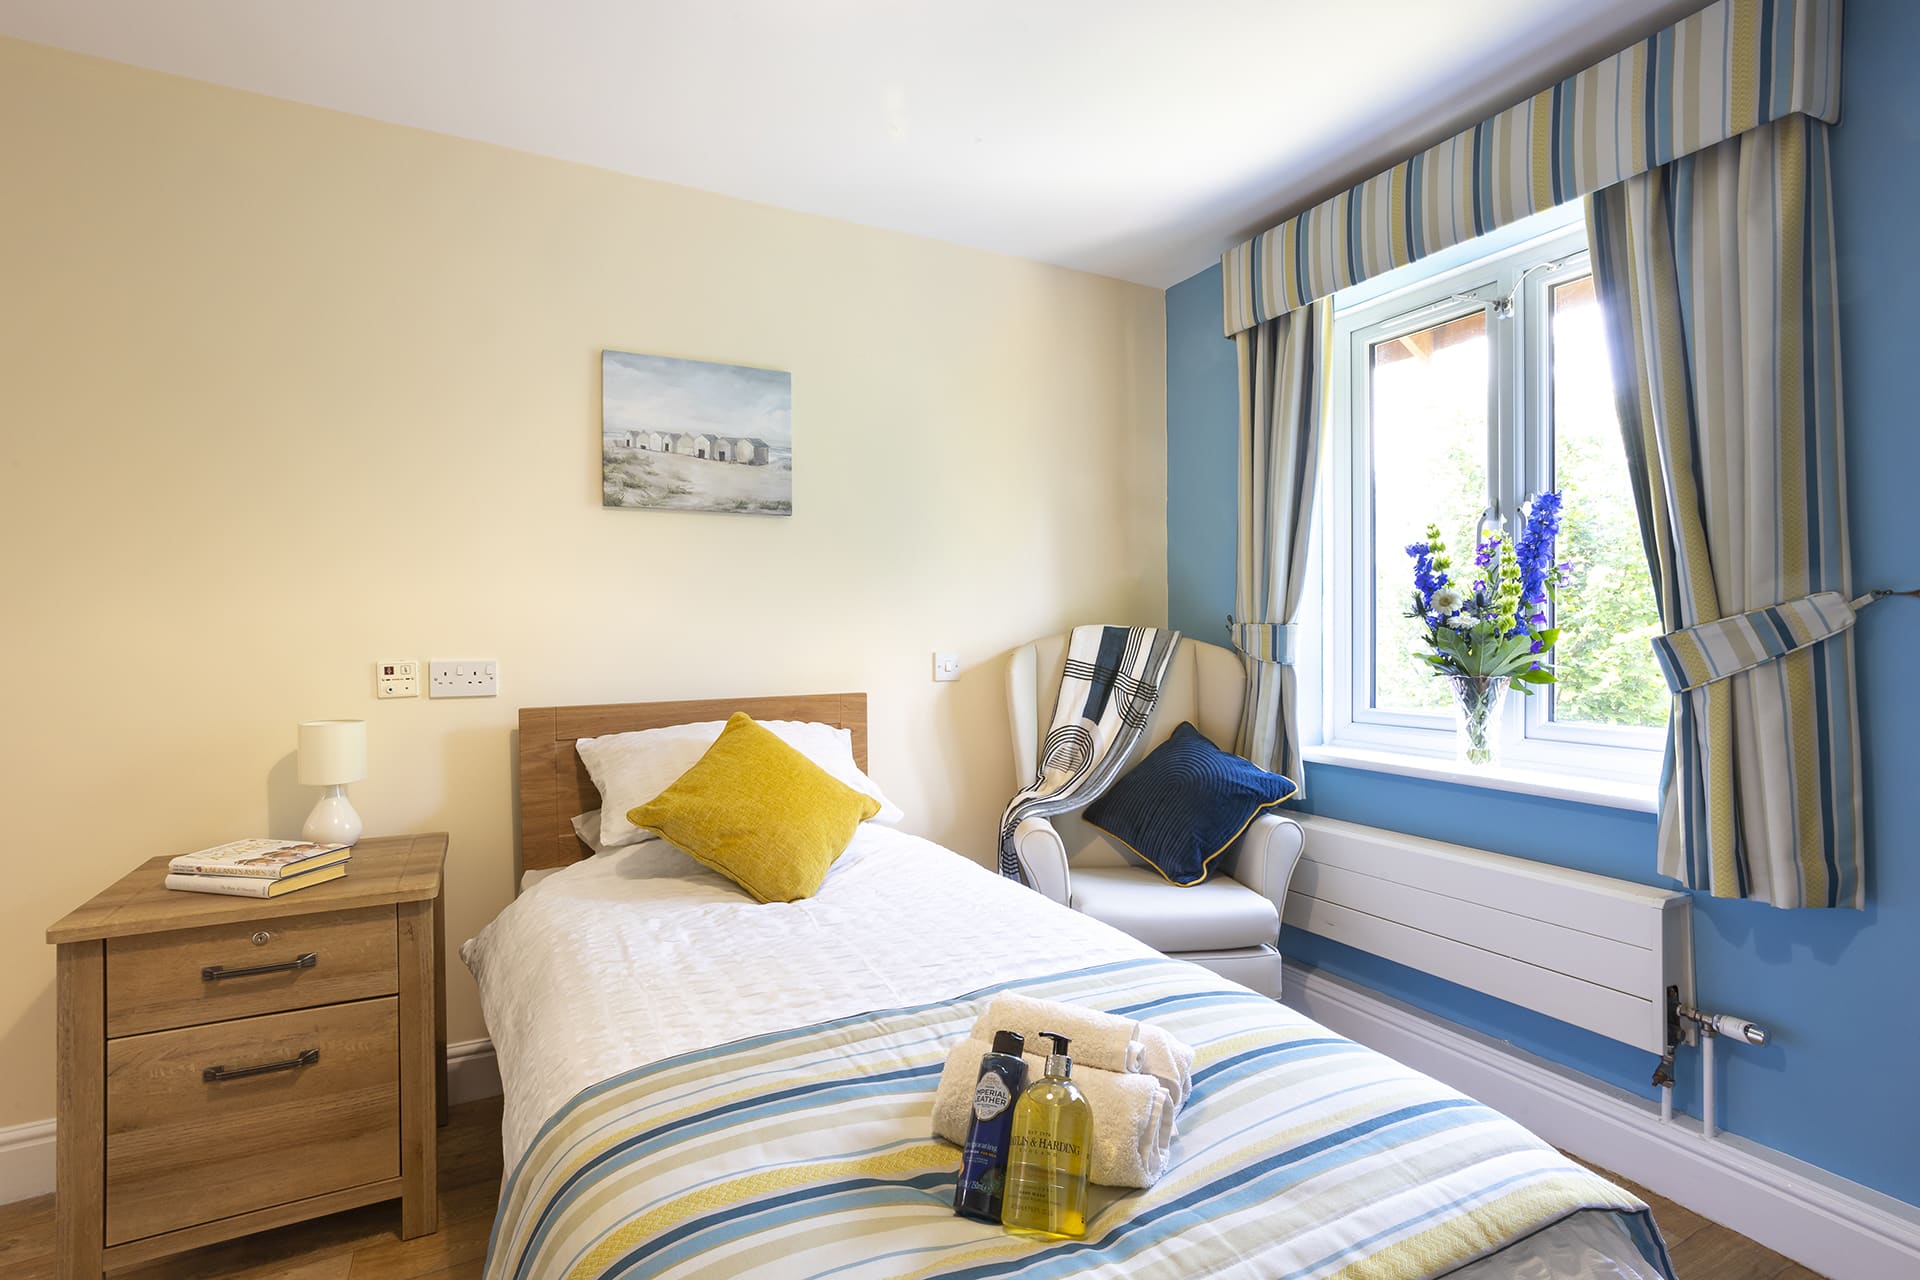 Bedroom with garden view with blue and yellow colour scheme at Lily House in Ely.